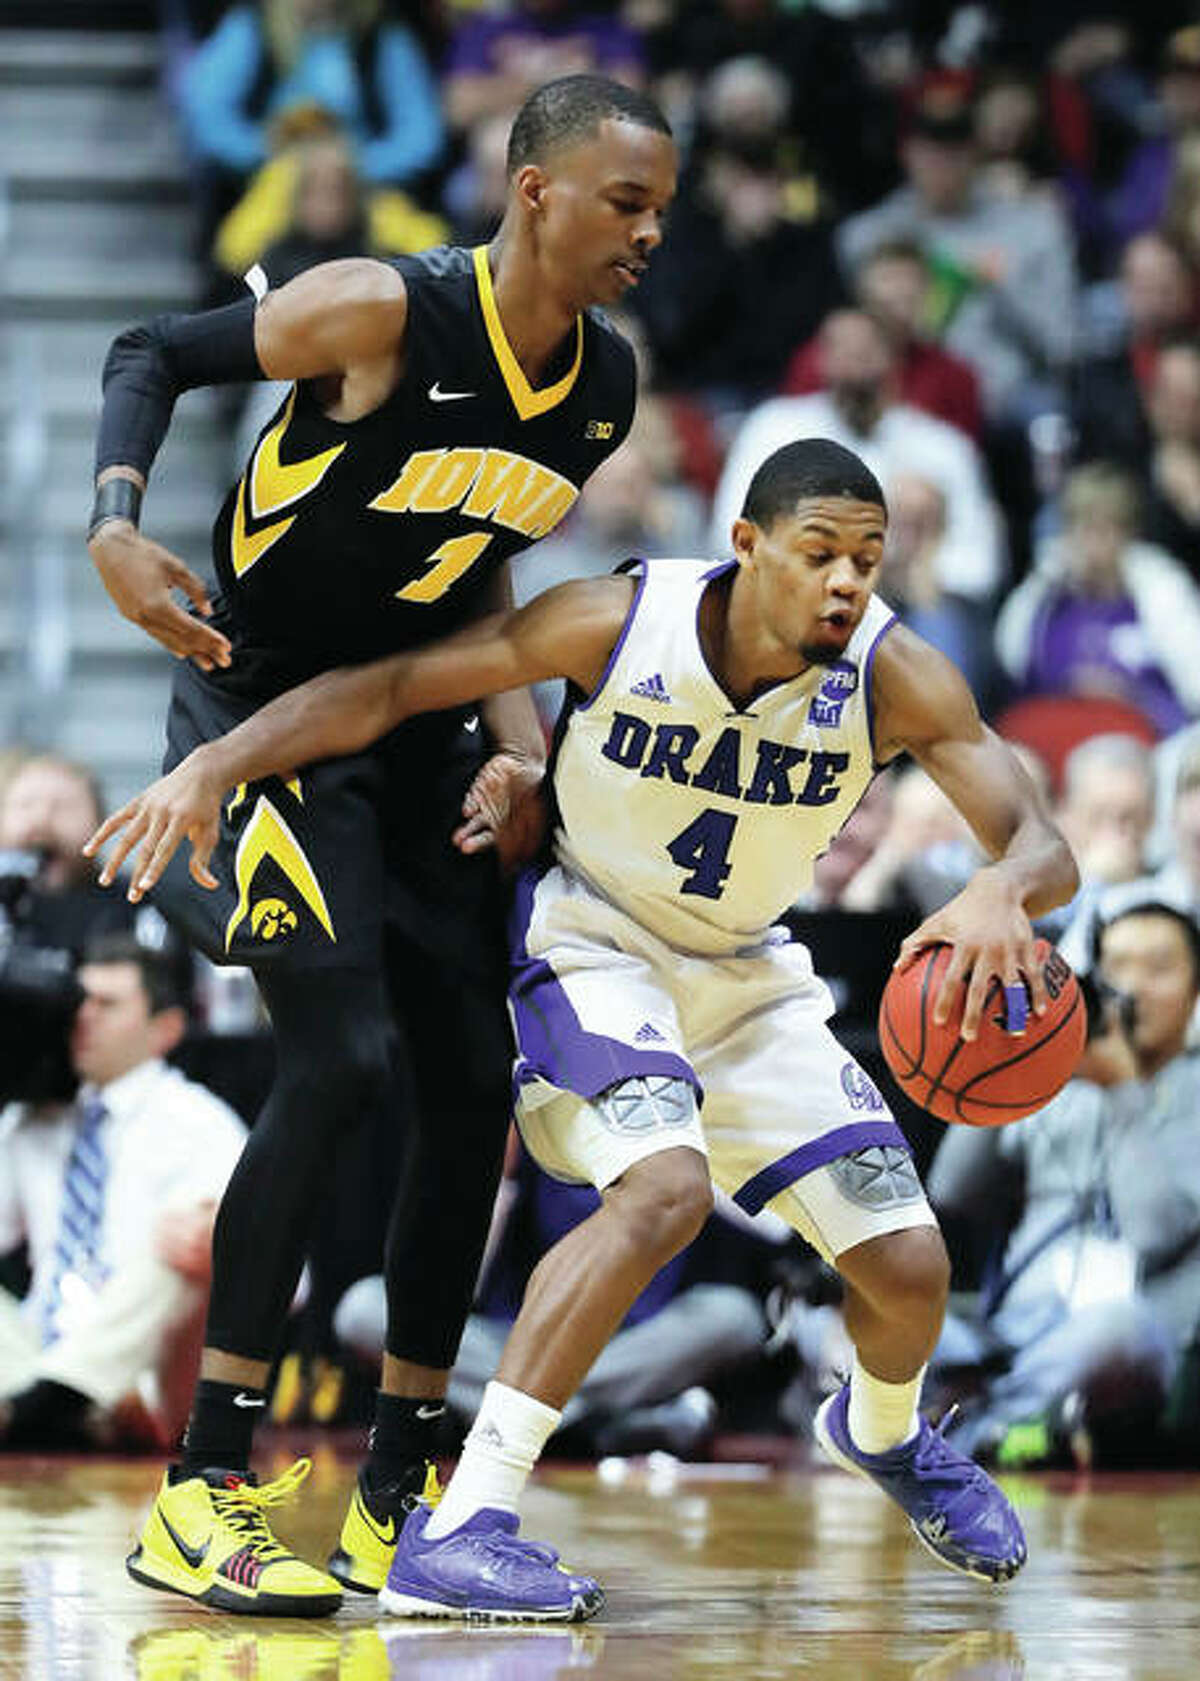 Drake guard De’Antae McMurray (4), a senior from Alton, drives around Iowa’s Maishe Dailey during a NCAA college basketball game Dec. 16 in Des Moines, Iowa. Iowa won 90-64. On Friday night back in Des Moines, the 6-foot-2 McMurray scored 16 points in the Bulldogs’ 81-57 victory over Maryland Eastern Shore that snapped Drake’s three-game losing streak. McMurray is second on the team in scoring at 12.0 points per game. The former prep standout at both Marquette Catholic and Alton high schools is shooting 40 percent from 3-point range and has scored in double figures in each of Drake’s last four games. The 6-7 Bulldogs open Missouri Valley Conference play at home on Thursday against Bradley.